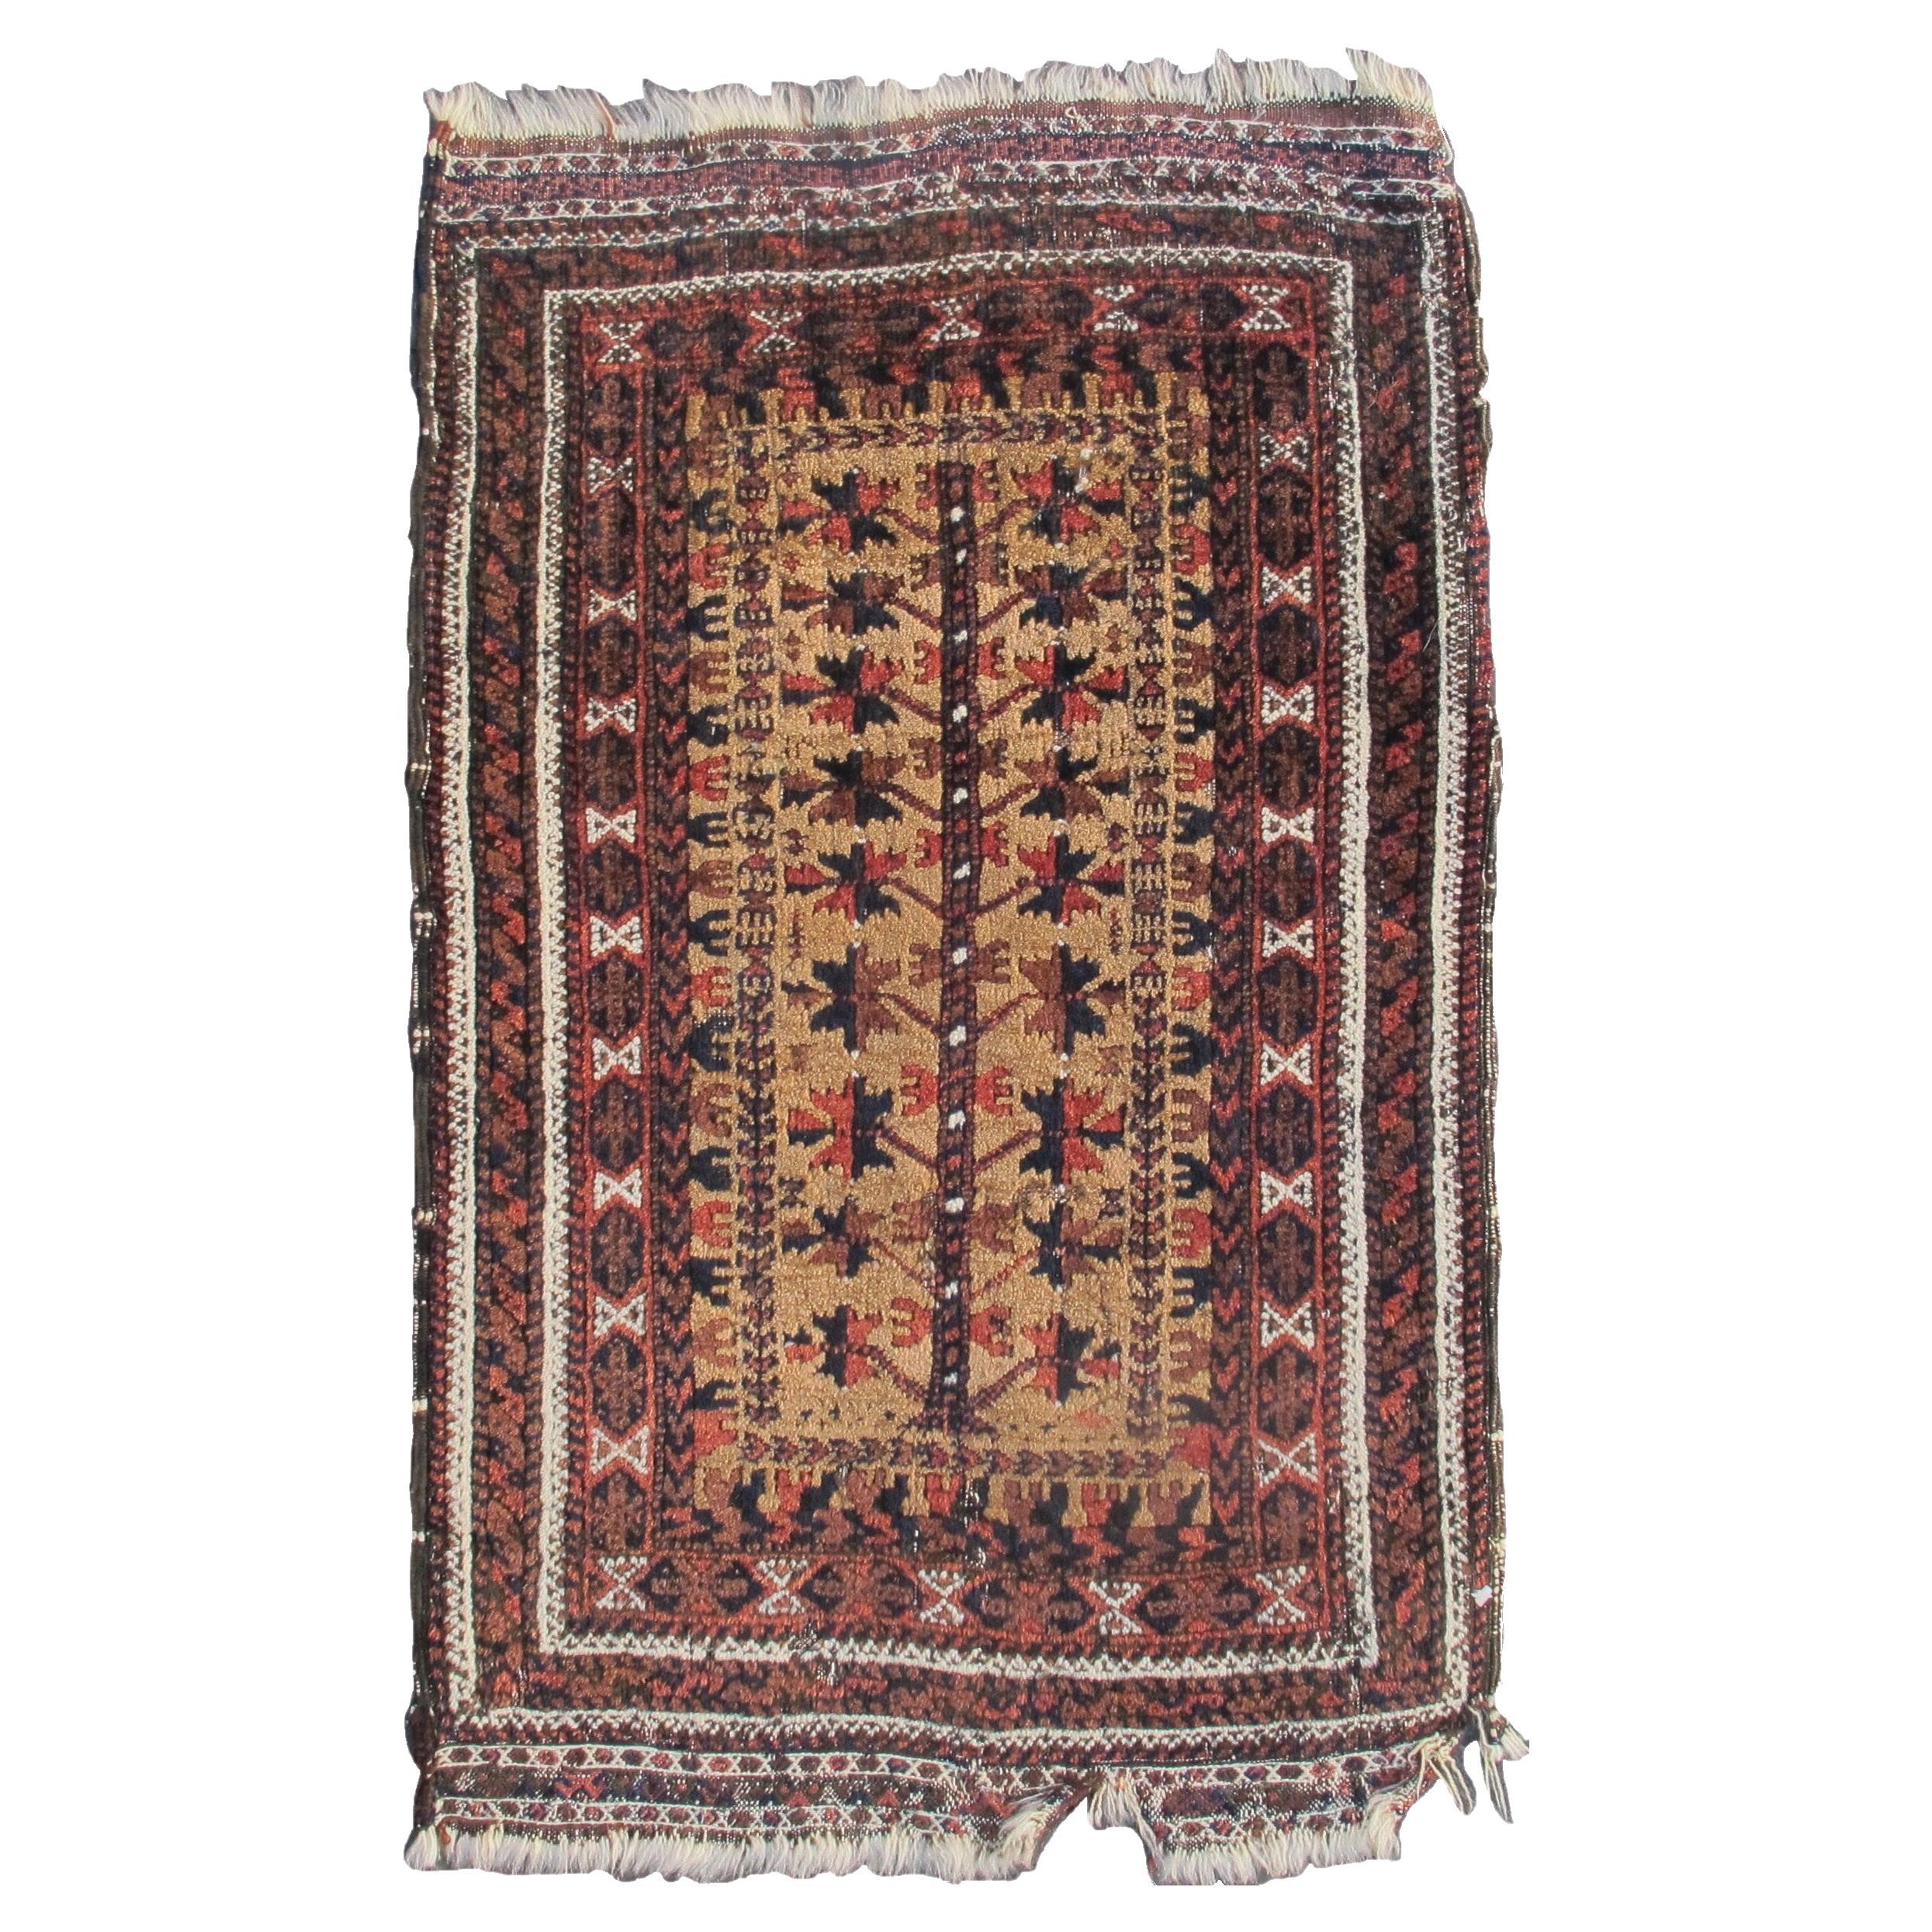 Antique Persian Baluch Balisht Rug, Late 19th Century For Sale